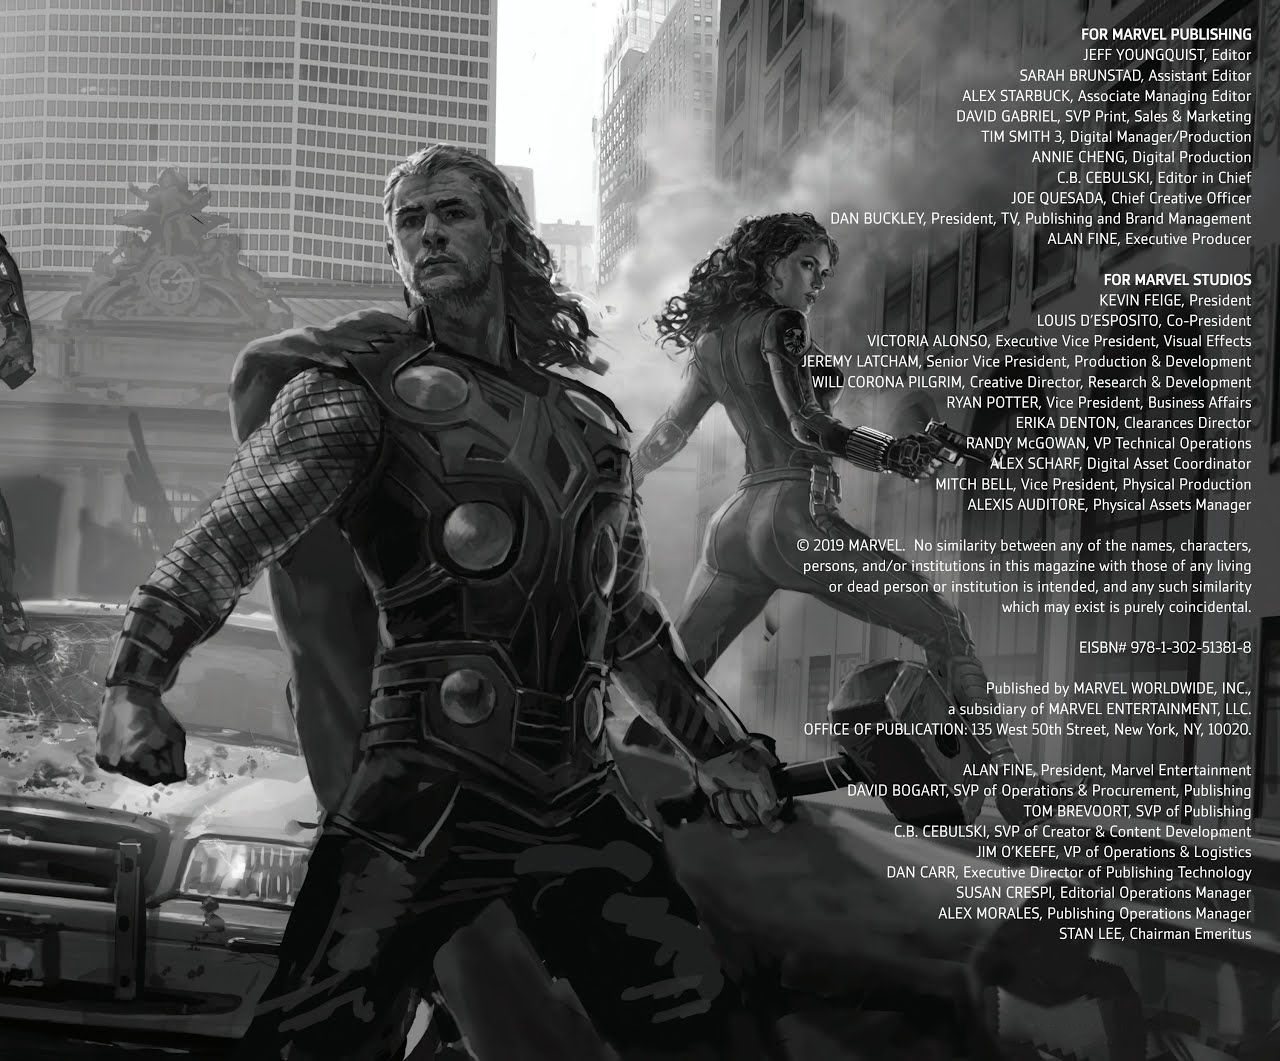 The Road to Marvel's Avengers Age of Ultron - The Art of the Marvel Cinematic Universe 5